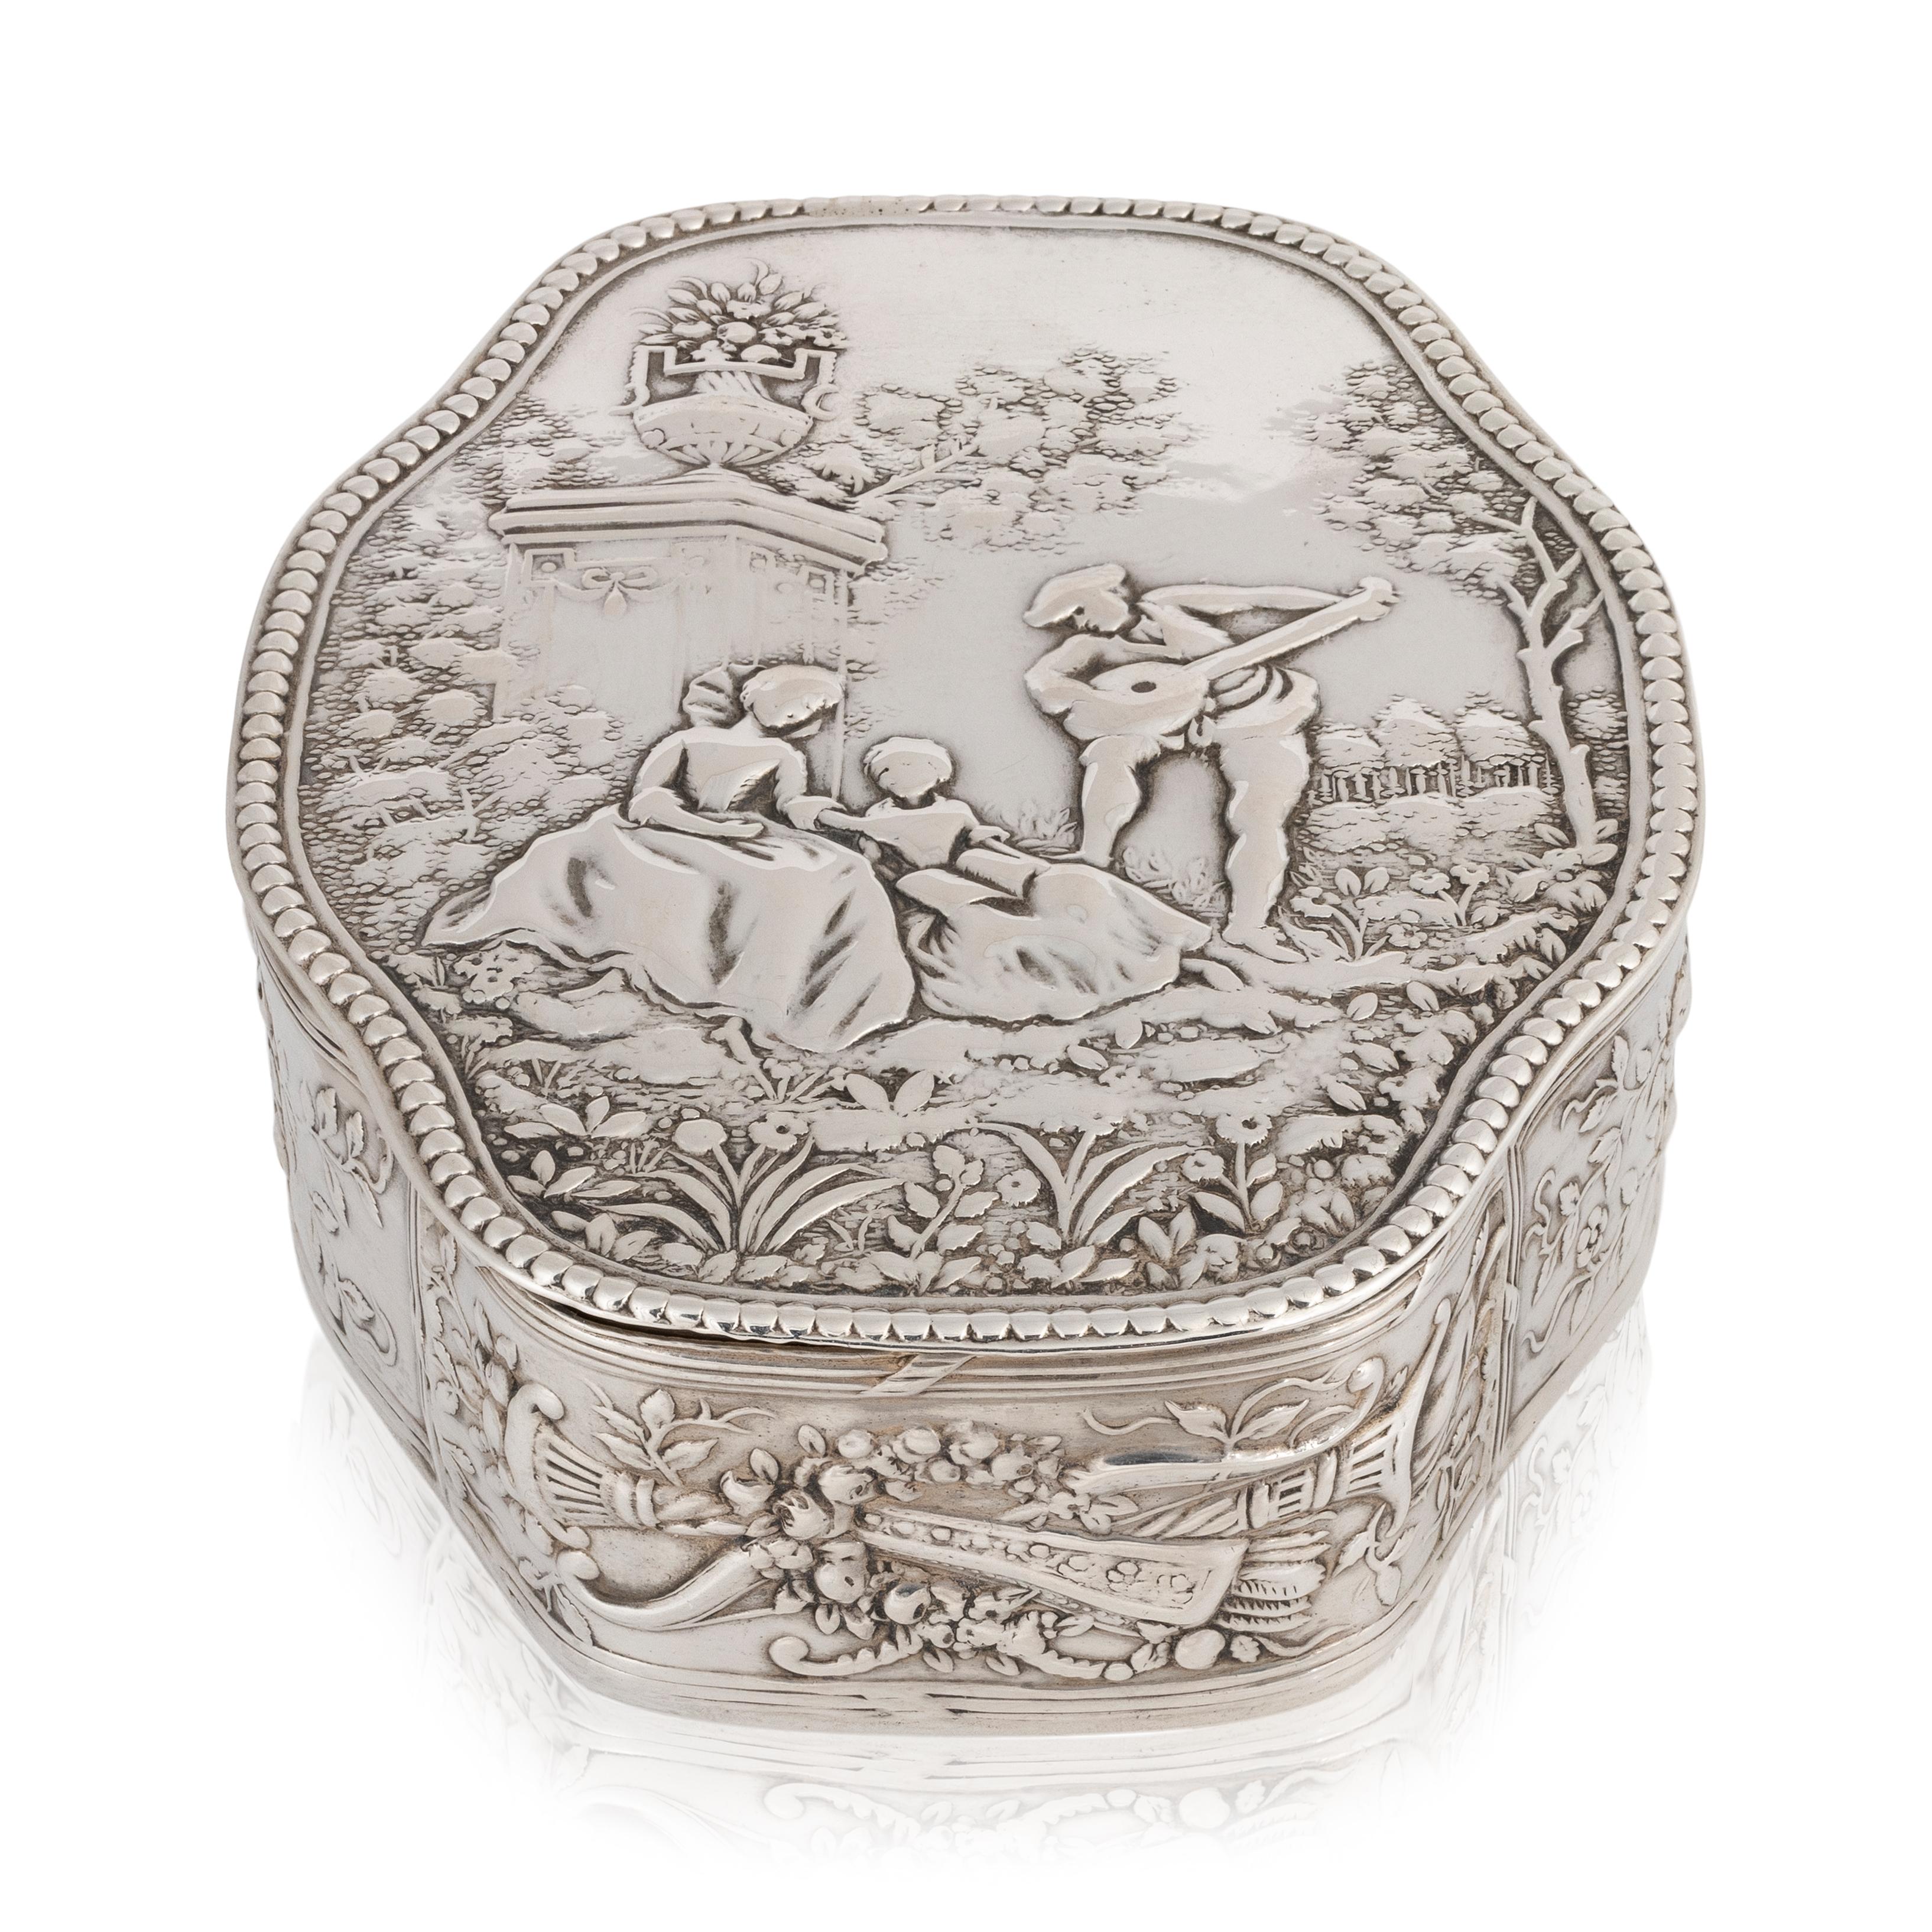 Eight sided silver lidded box with decorated sides and minstrel scene. Bottom marked 